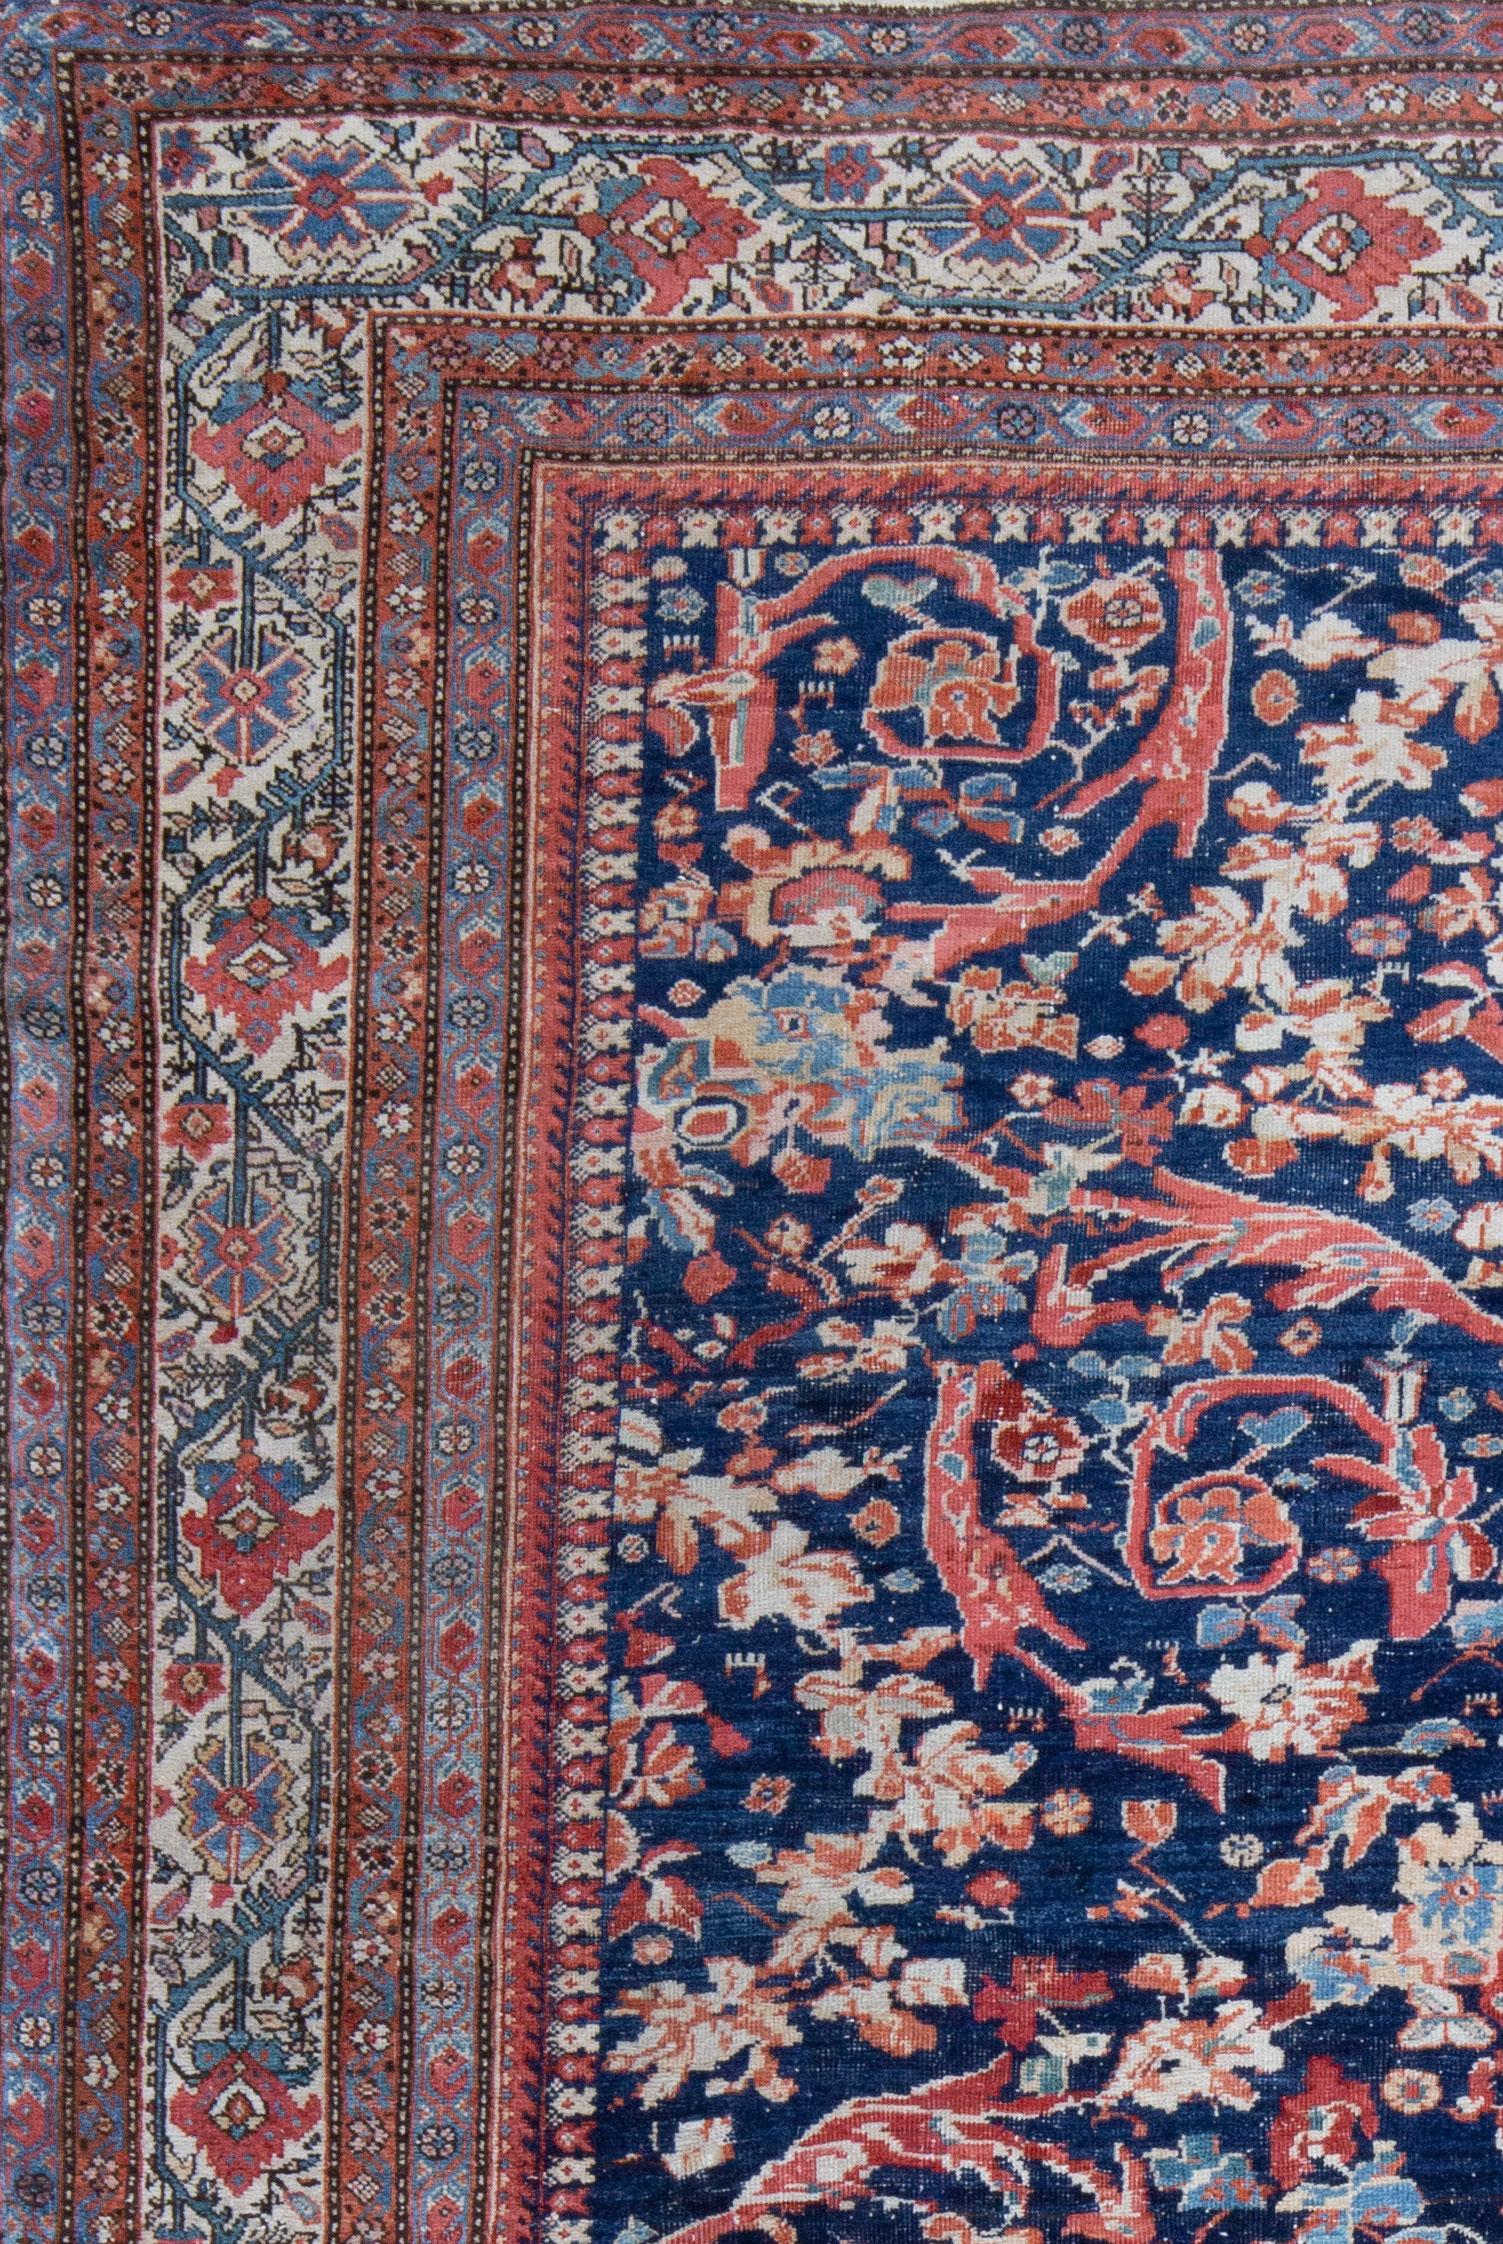 An unusual Ferahan with a rich navy field and vibrant all over floral design in light madder red, pink, coral, cornflower blue and jade green. A naturally dyed, turn of the century carpet with an even, low wool pile. Sides and ends preserved. A